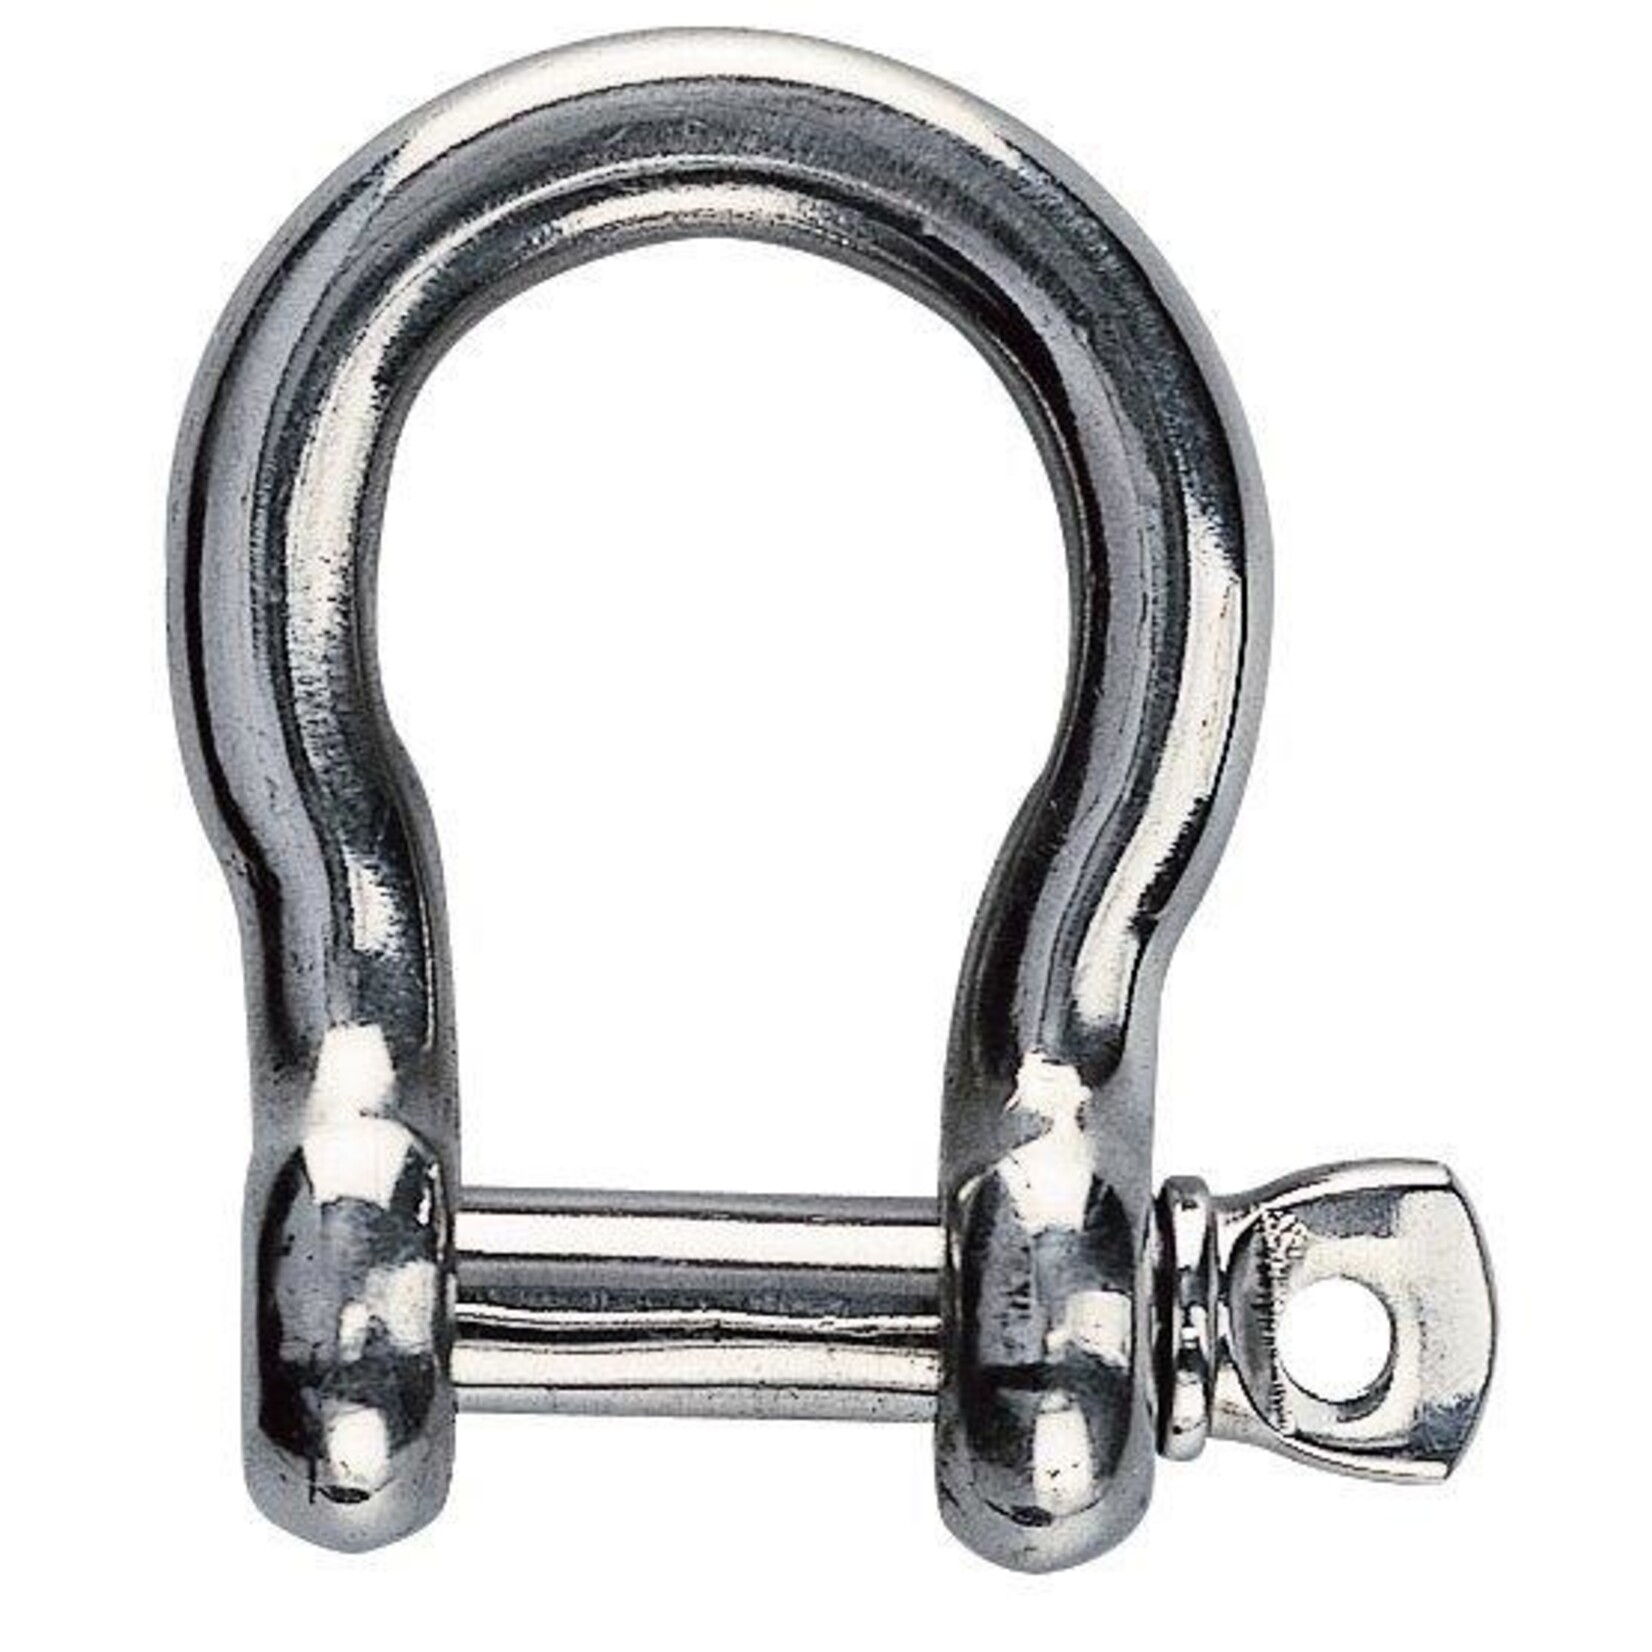 Plastimo Shackle bow stainless steel 10mm x 5